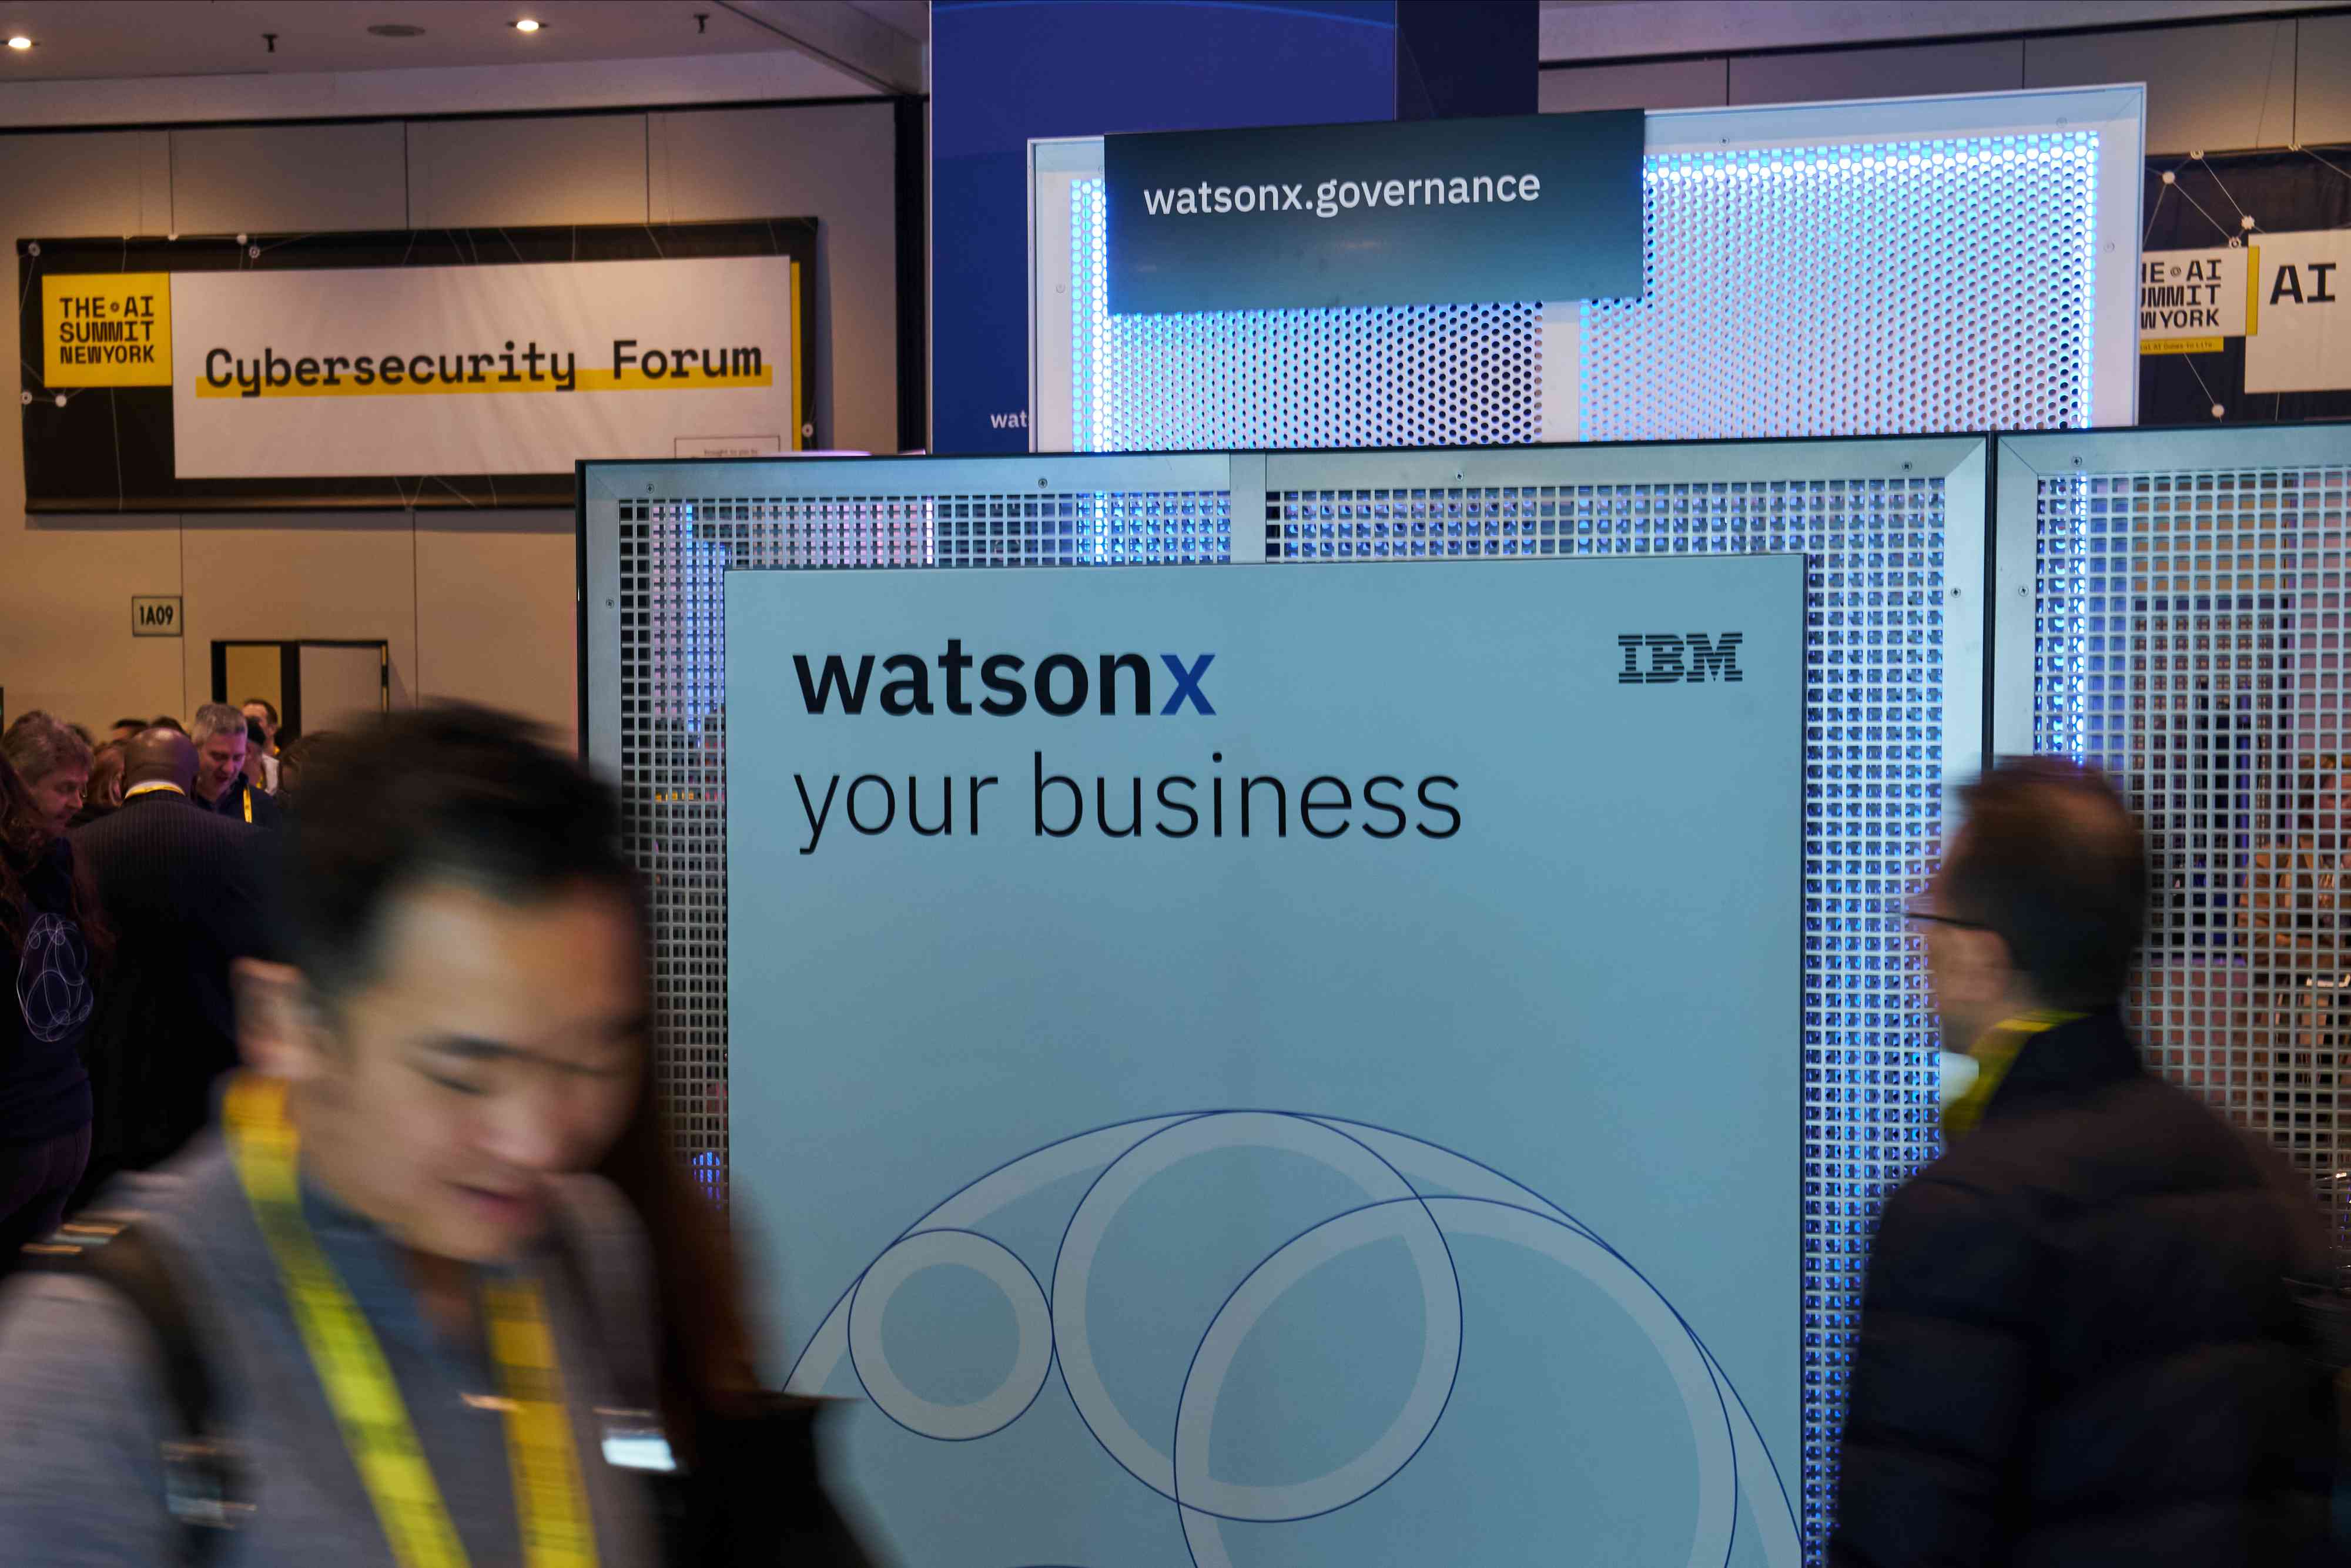 A sign at a conference displays the IBM logo.